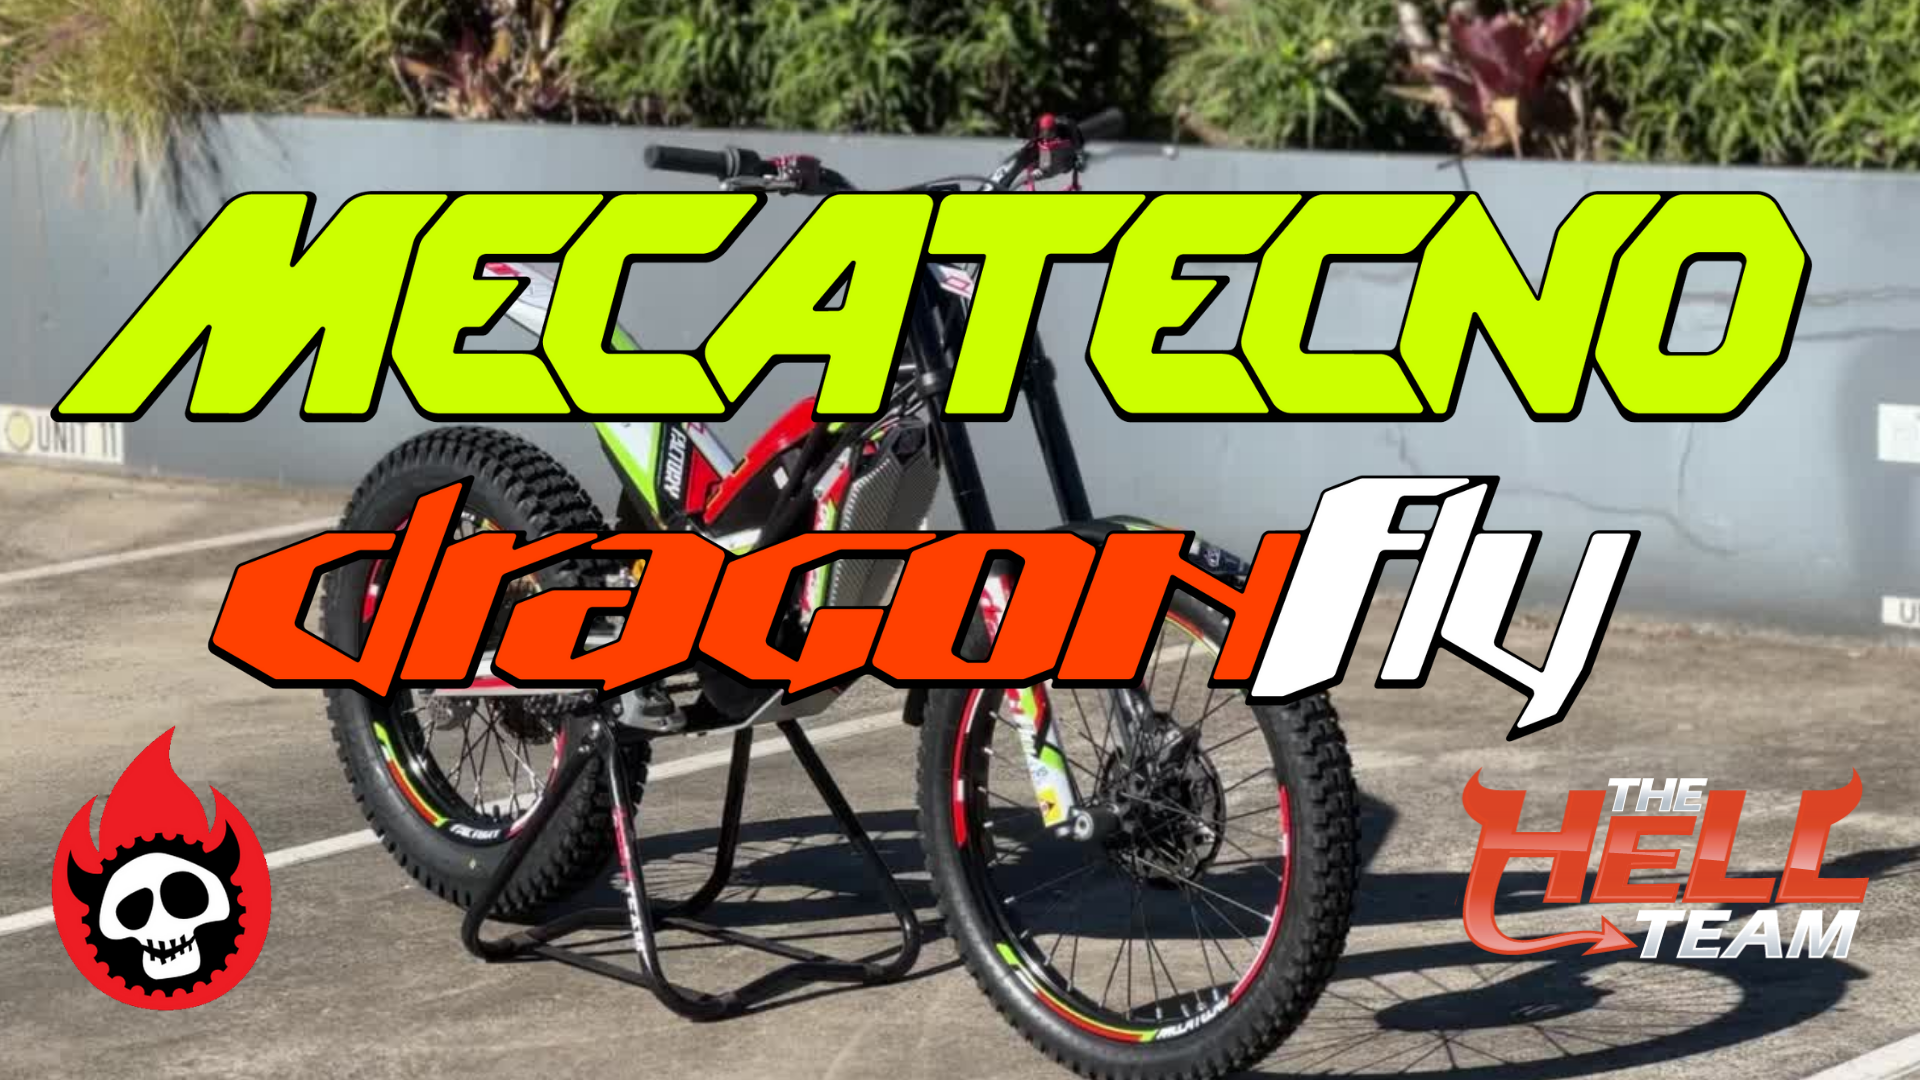 A closer look at the new Mecatecno DragonFly Electric trials bike.